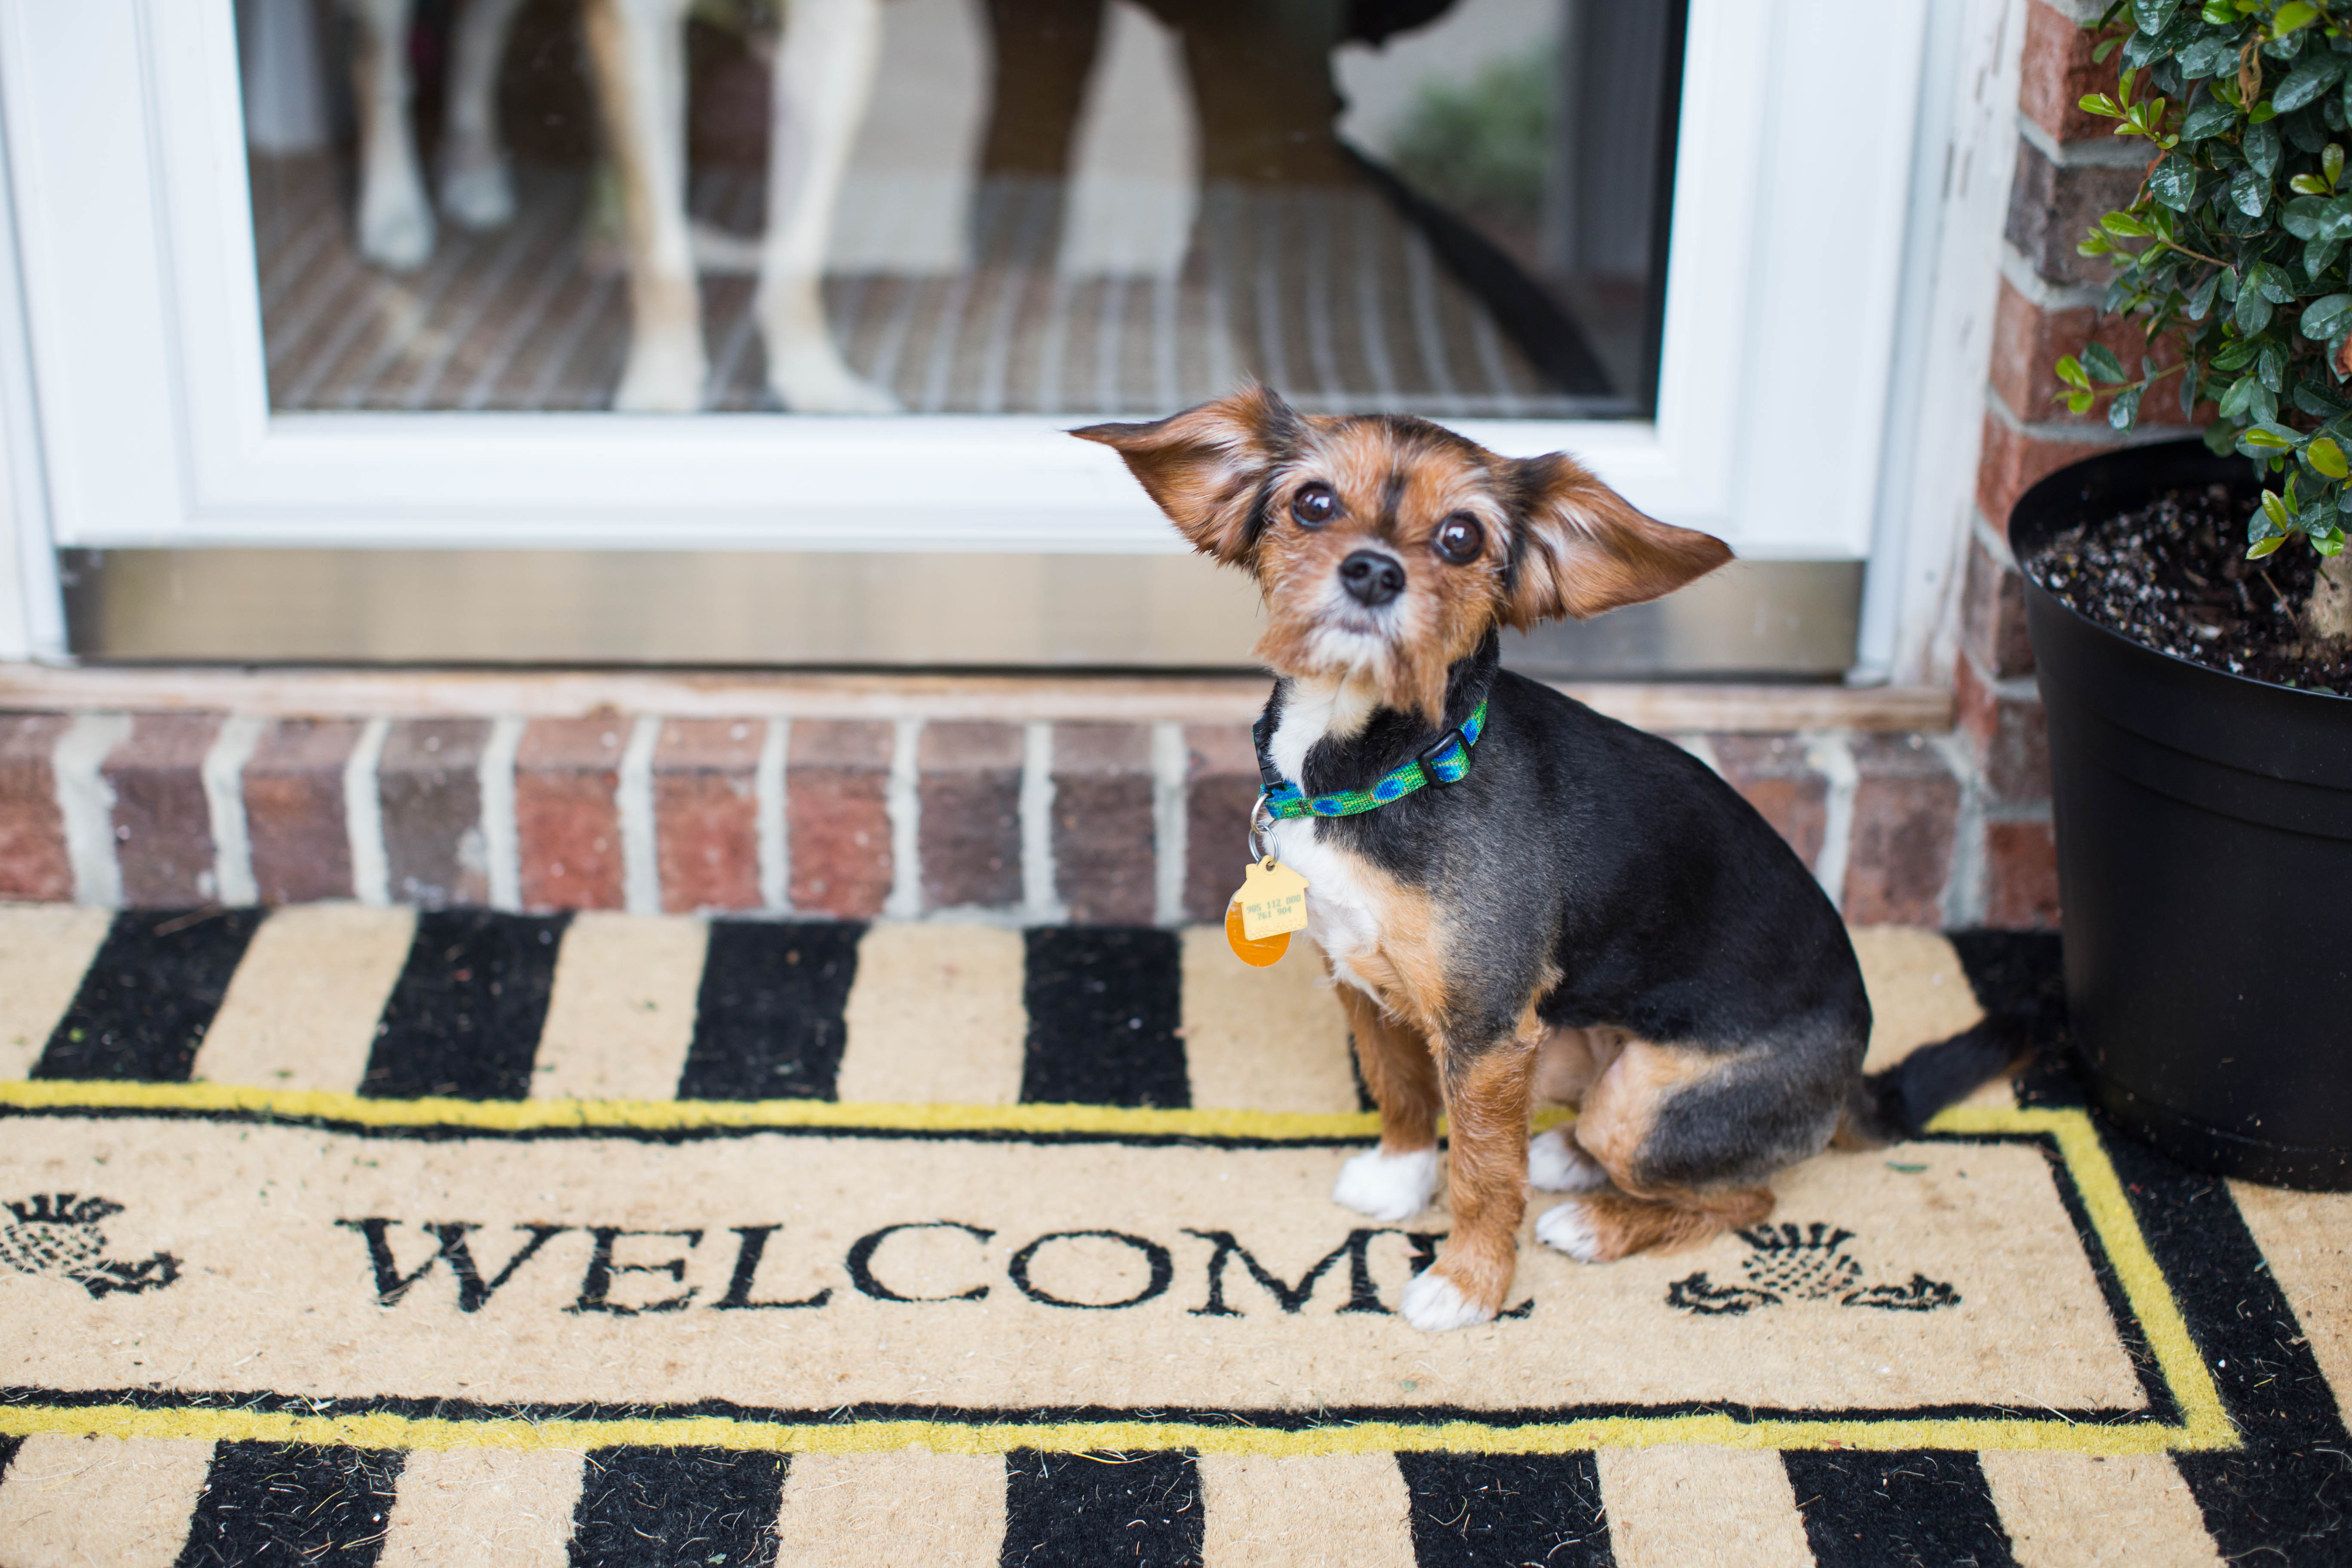 How to Make a Small Front Porch Inviting by NC blogger Amy of Coffee Beans and Bobby Pins